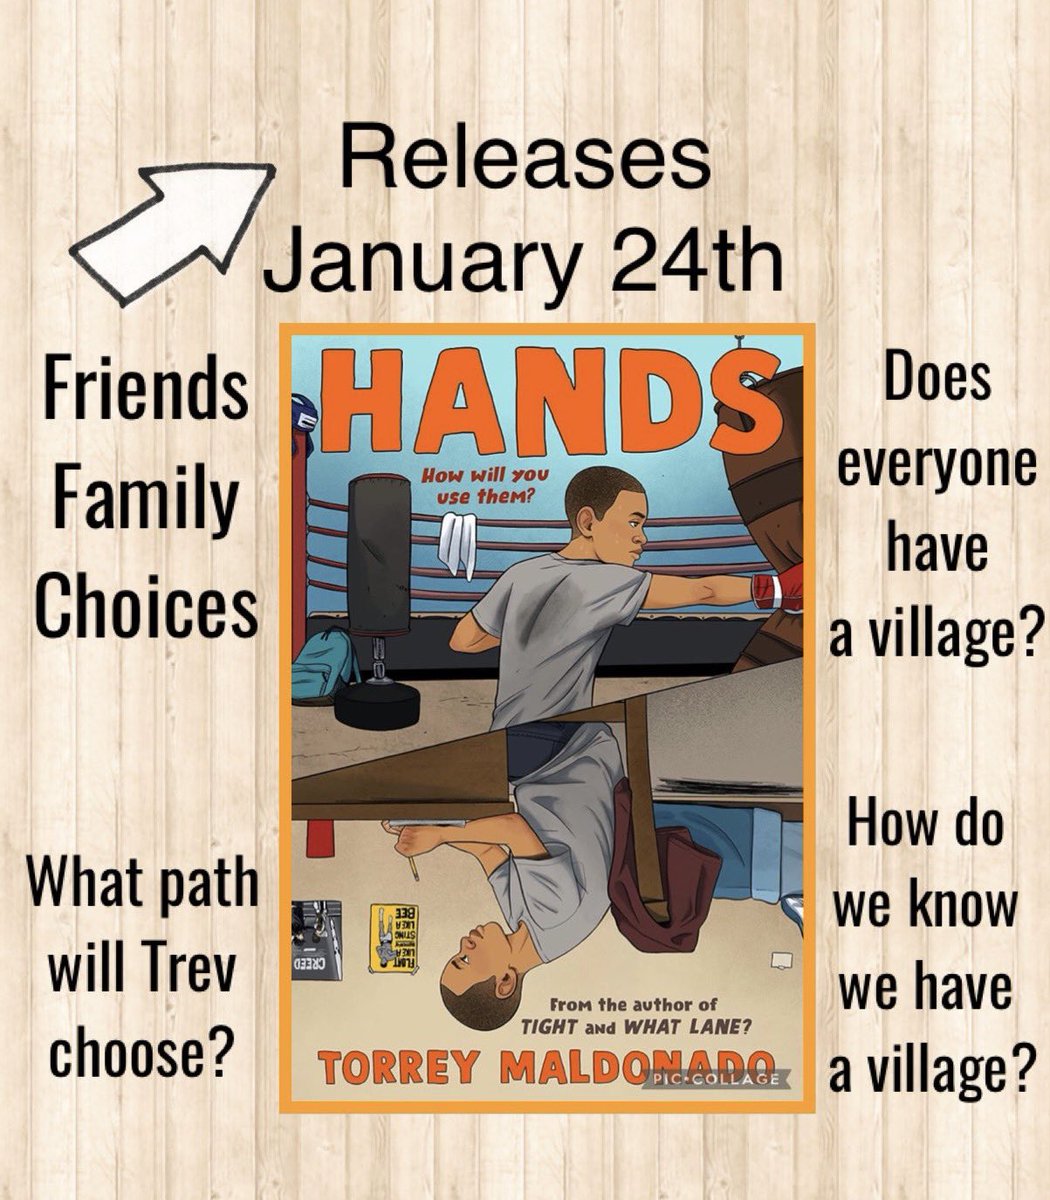 Hi #MGBookchat I'm Torrey Maldonado, a Brooklyn, NY teacher & author of 4 MG books with Penguin Random House. Just back from presenting at NCTE22 & still buzzing from great feedback there about my January release, Hands.